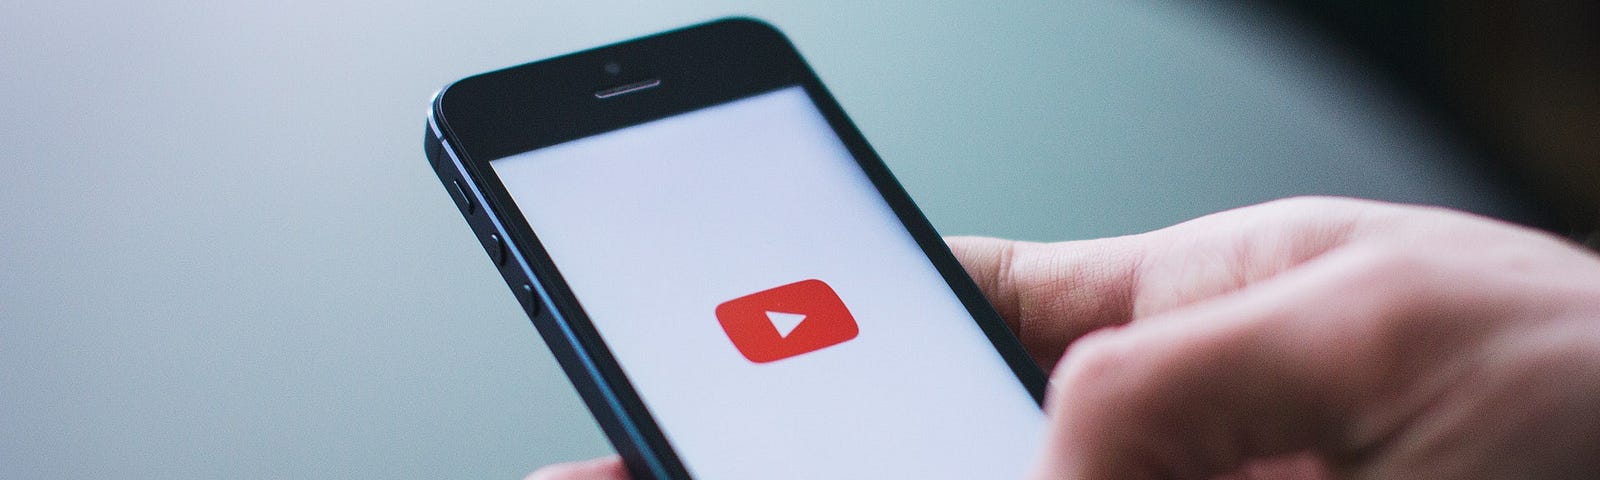 A hand holding a mobile phone with the Youtube logo on screen.